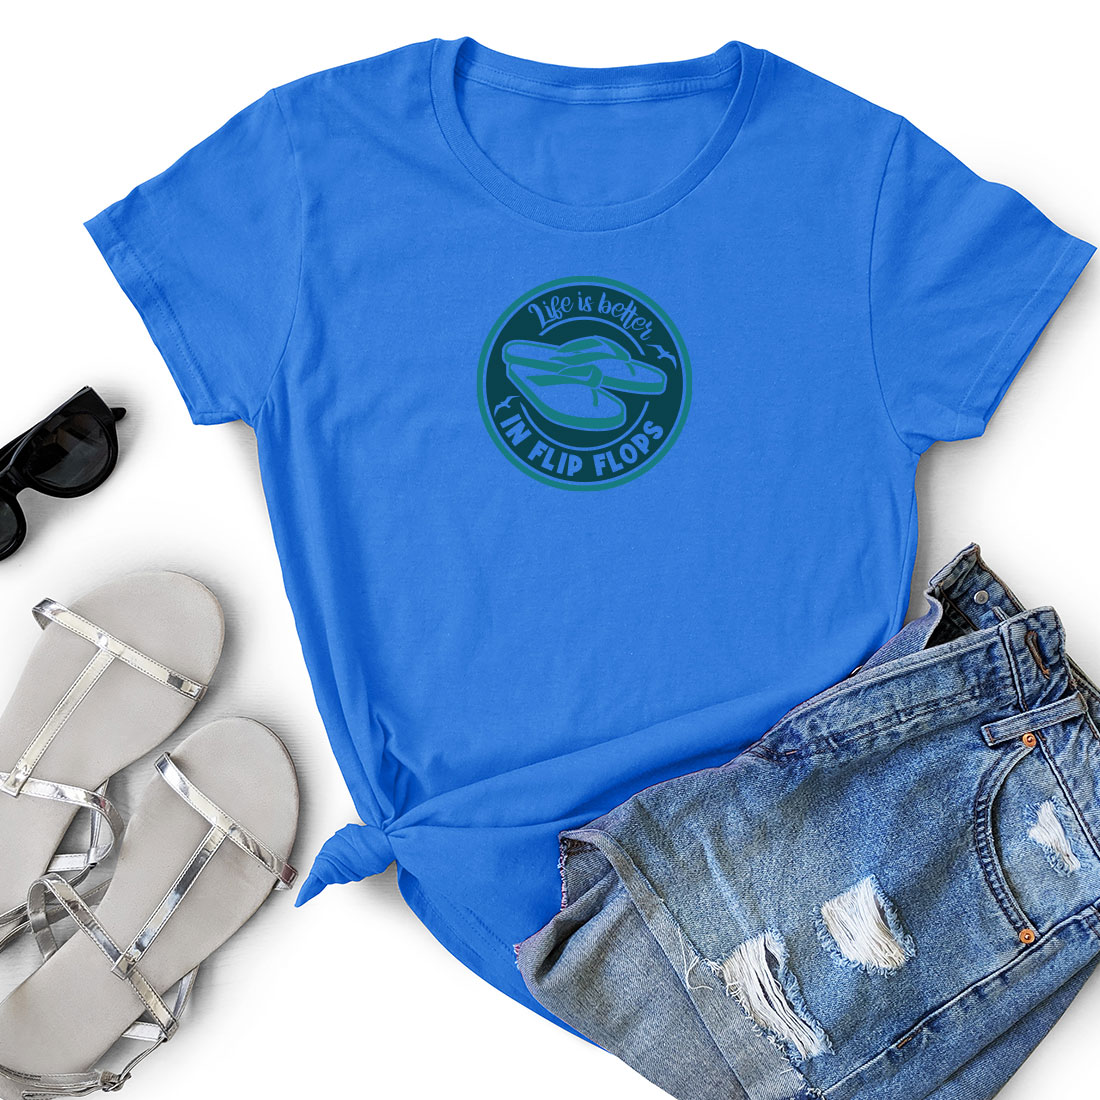 Women's blue shirt with a green logo next to a pair of shorts.